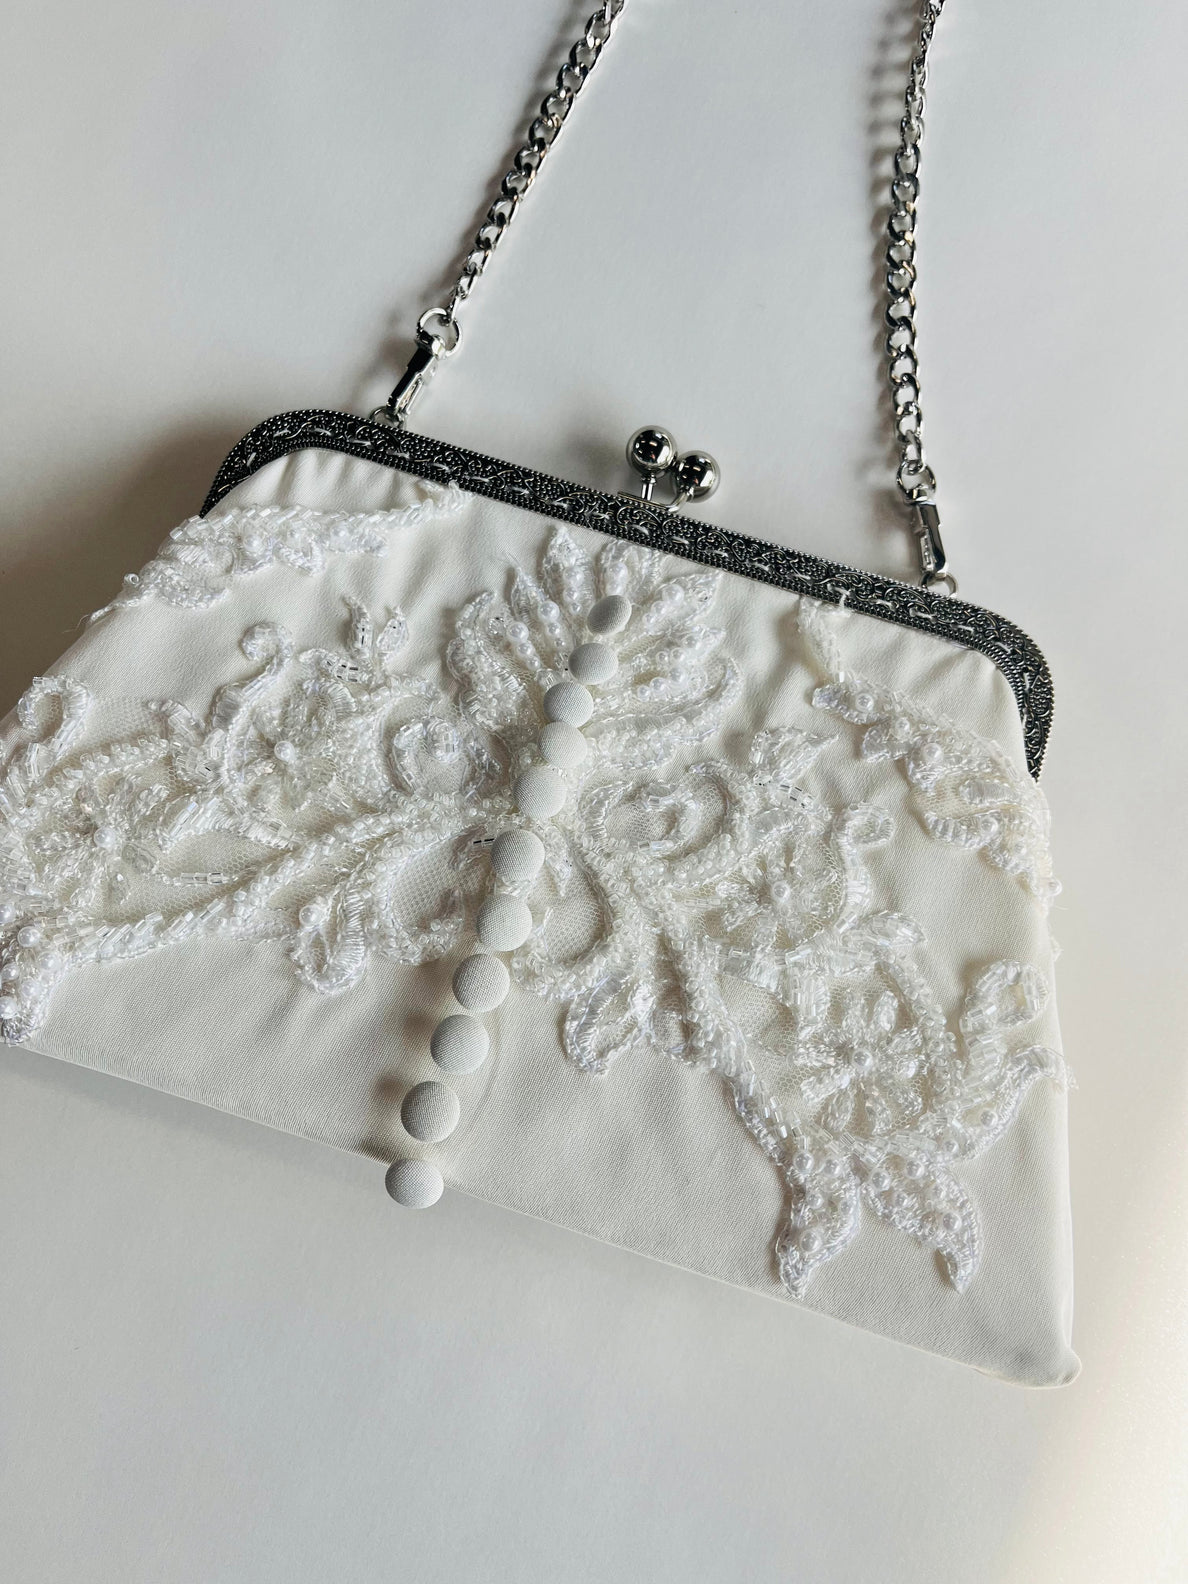 Fashionable Bridal Clutches / Wedding Day Purses For The Bride